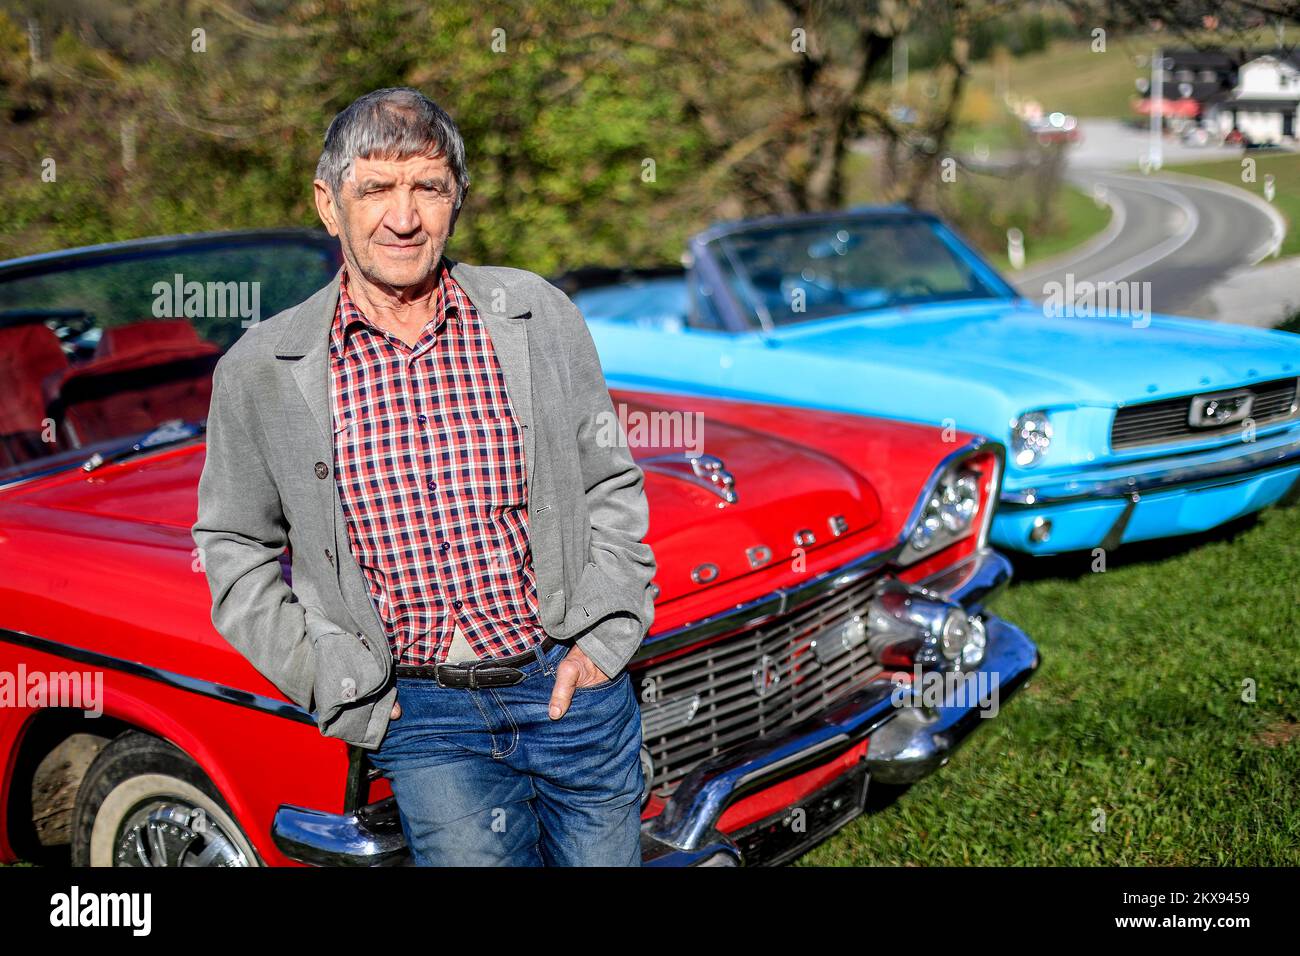 24.10.2018., Croatia, Generalski Stol - Vlado Skrtic buys and repairs oldtimers. More than 30 American cars went through his garage. Currently owns three cars that are rarely seen on Croatian roads. Red White Dodge Coronet from 1958, Blue Ford Mustang, and Volkswagen Beetle, adapted for off-road driving. His favorite car is Dodge Coronet. Photo: Slavko Midzor/PIXSELL Stock Photo